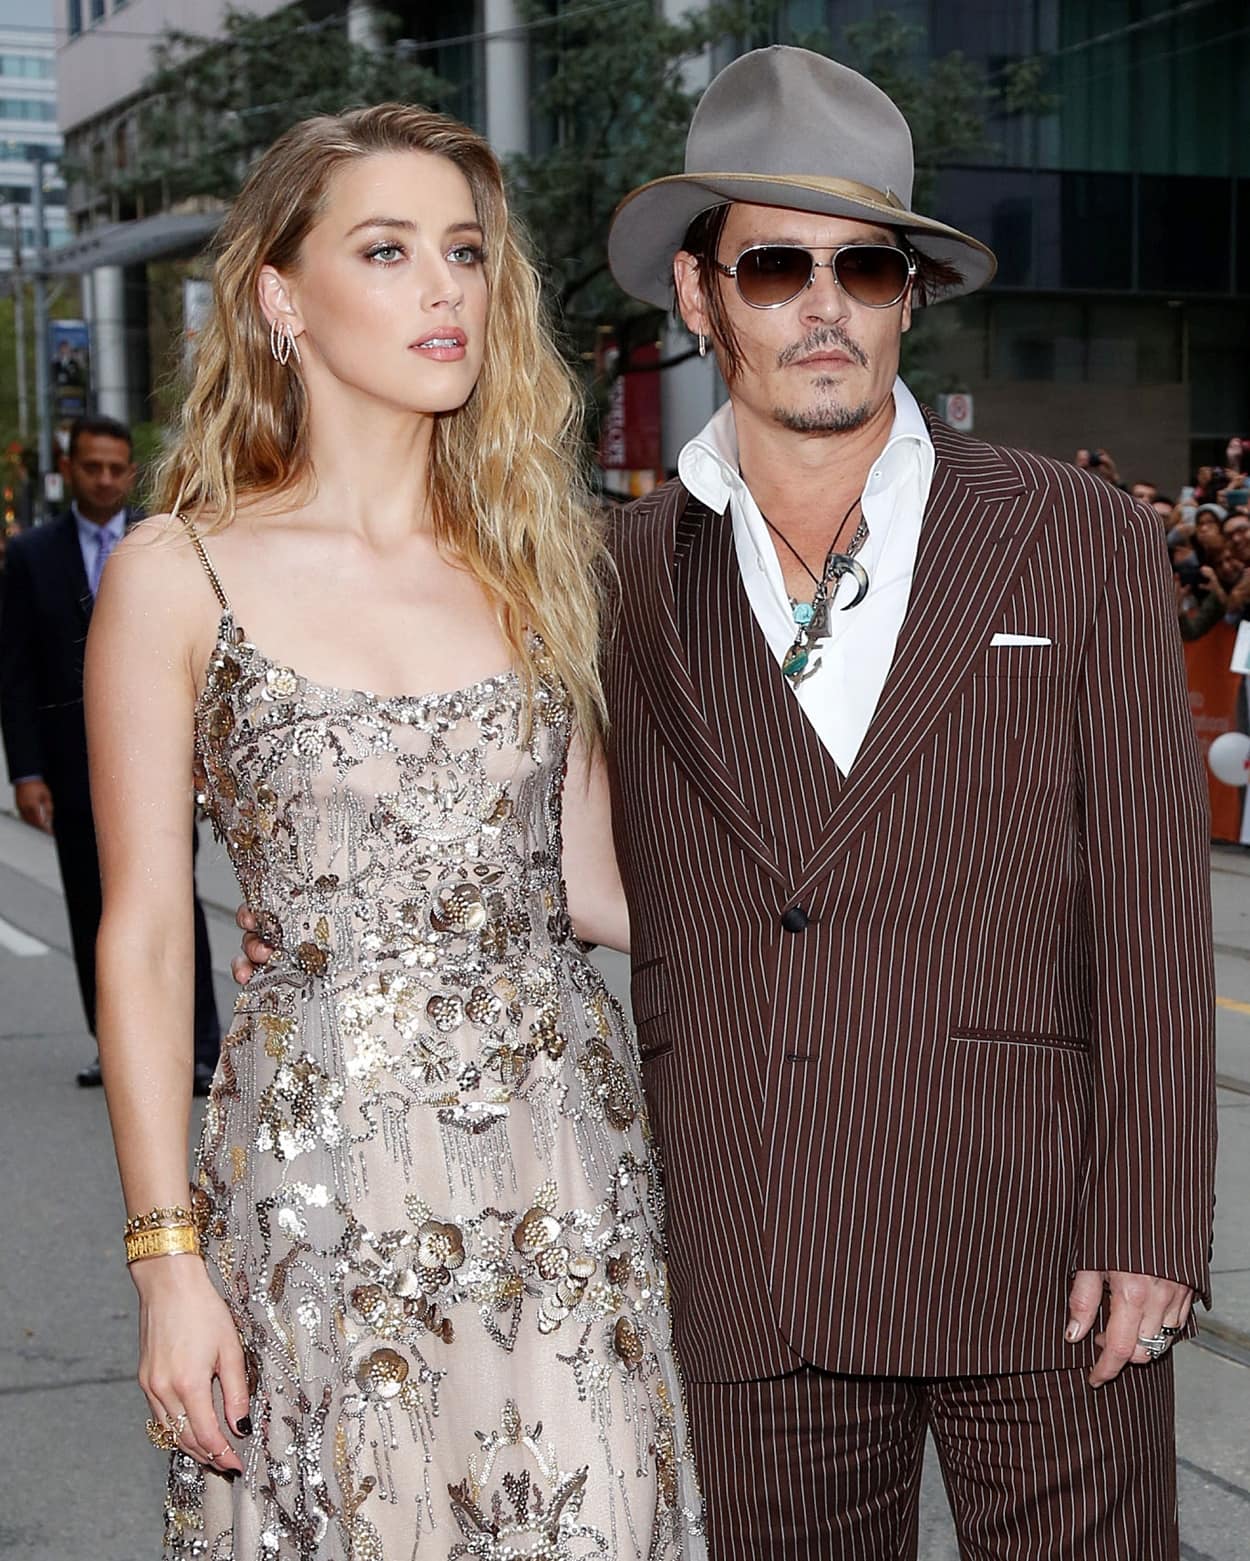 Johnny Depp won his defamation lawsuit against Amber Heard and she was ordered to pay $10 million in damages